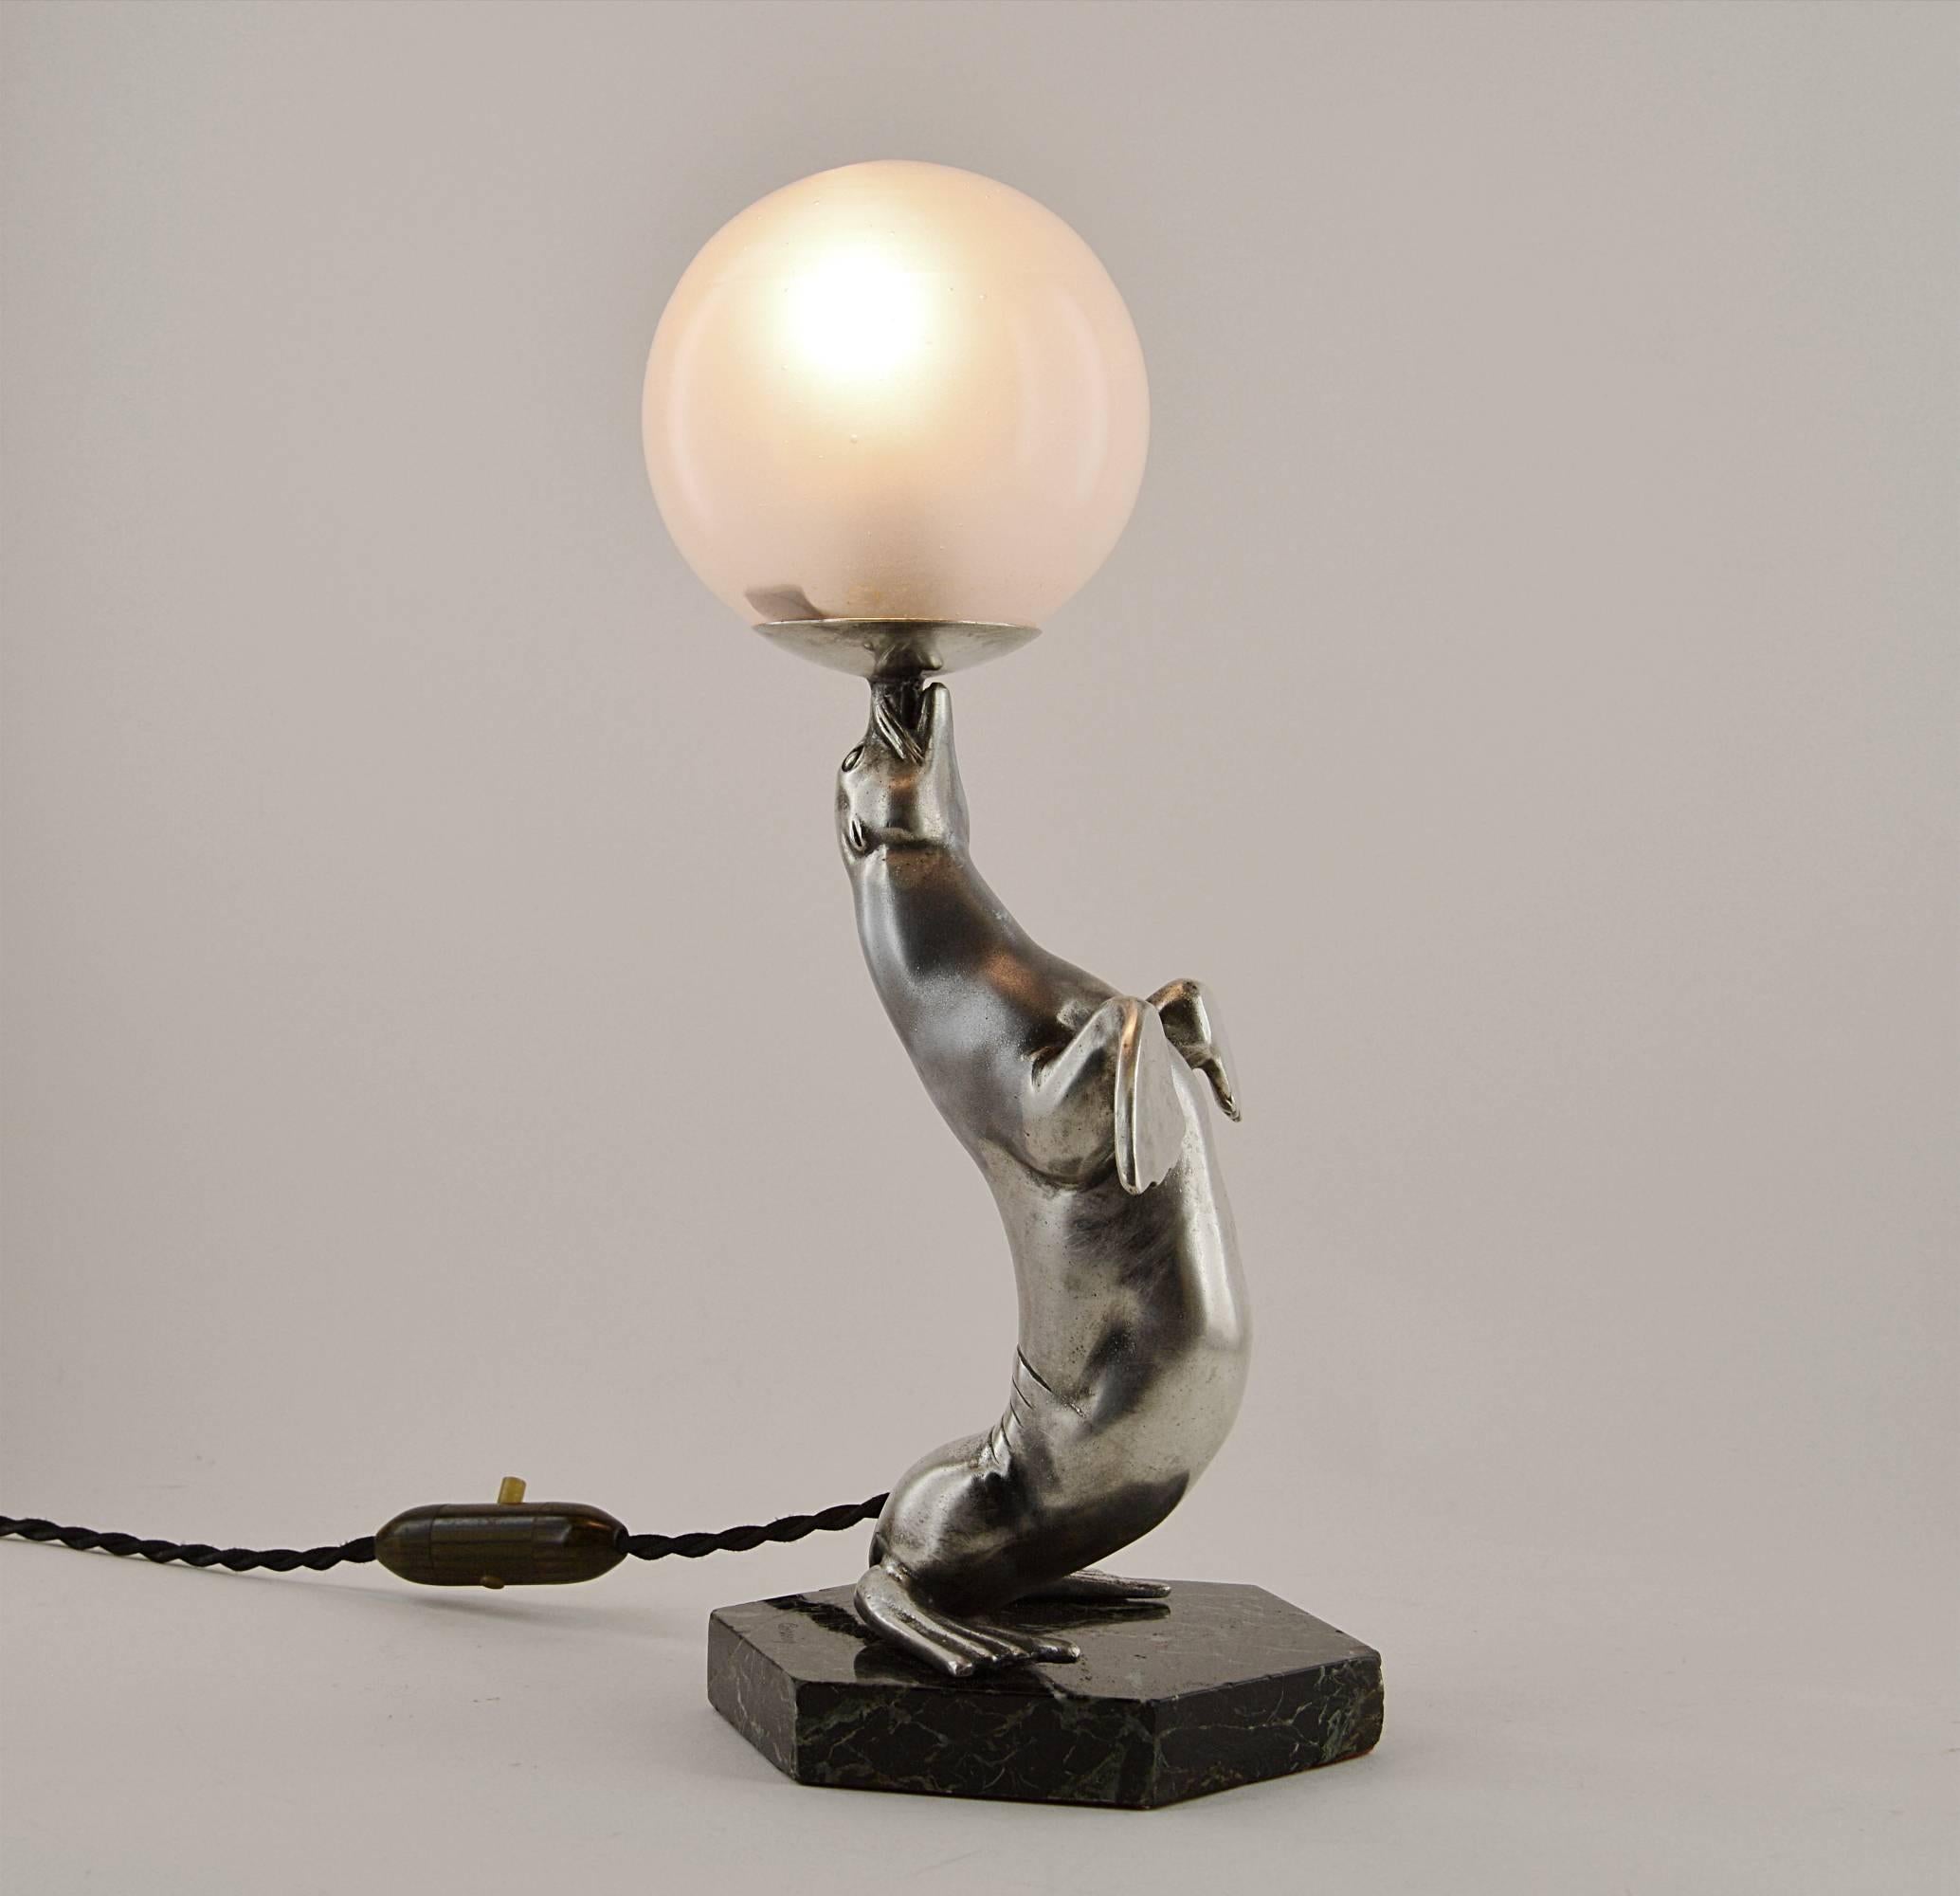 French Art Deco table lamp by Louis-Albert Carvin, France, 1930s. silver plated spelter sea-lion playing with a ball (opaque glass shade). On a black and green marble base. Will be delivered wired for your country (US, EU, Australia, etc).

 